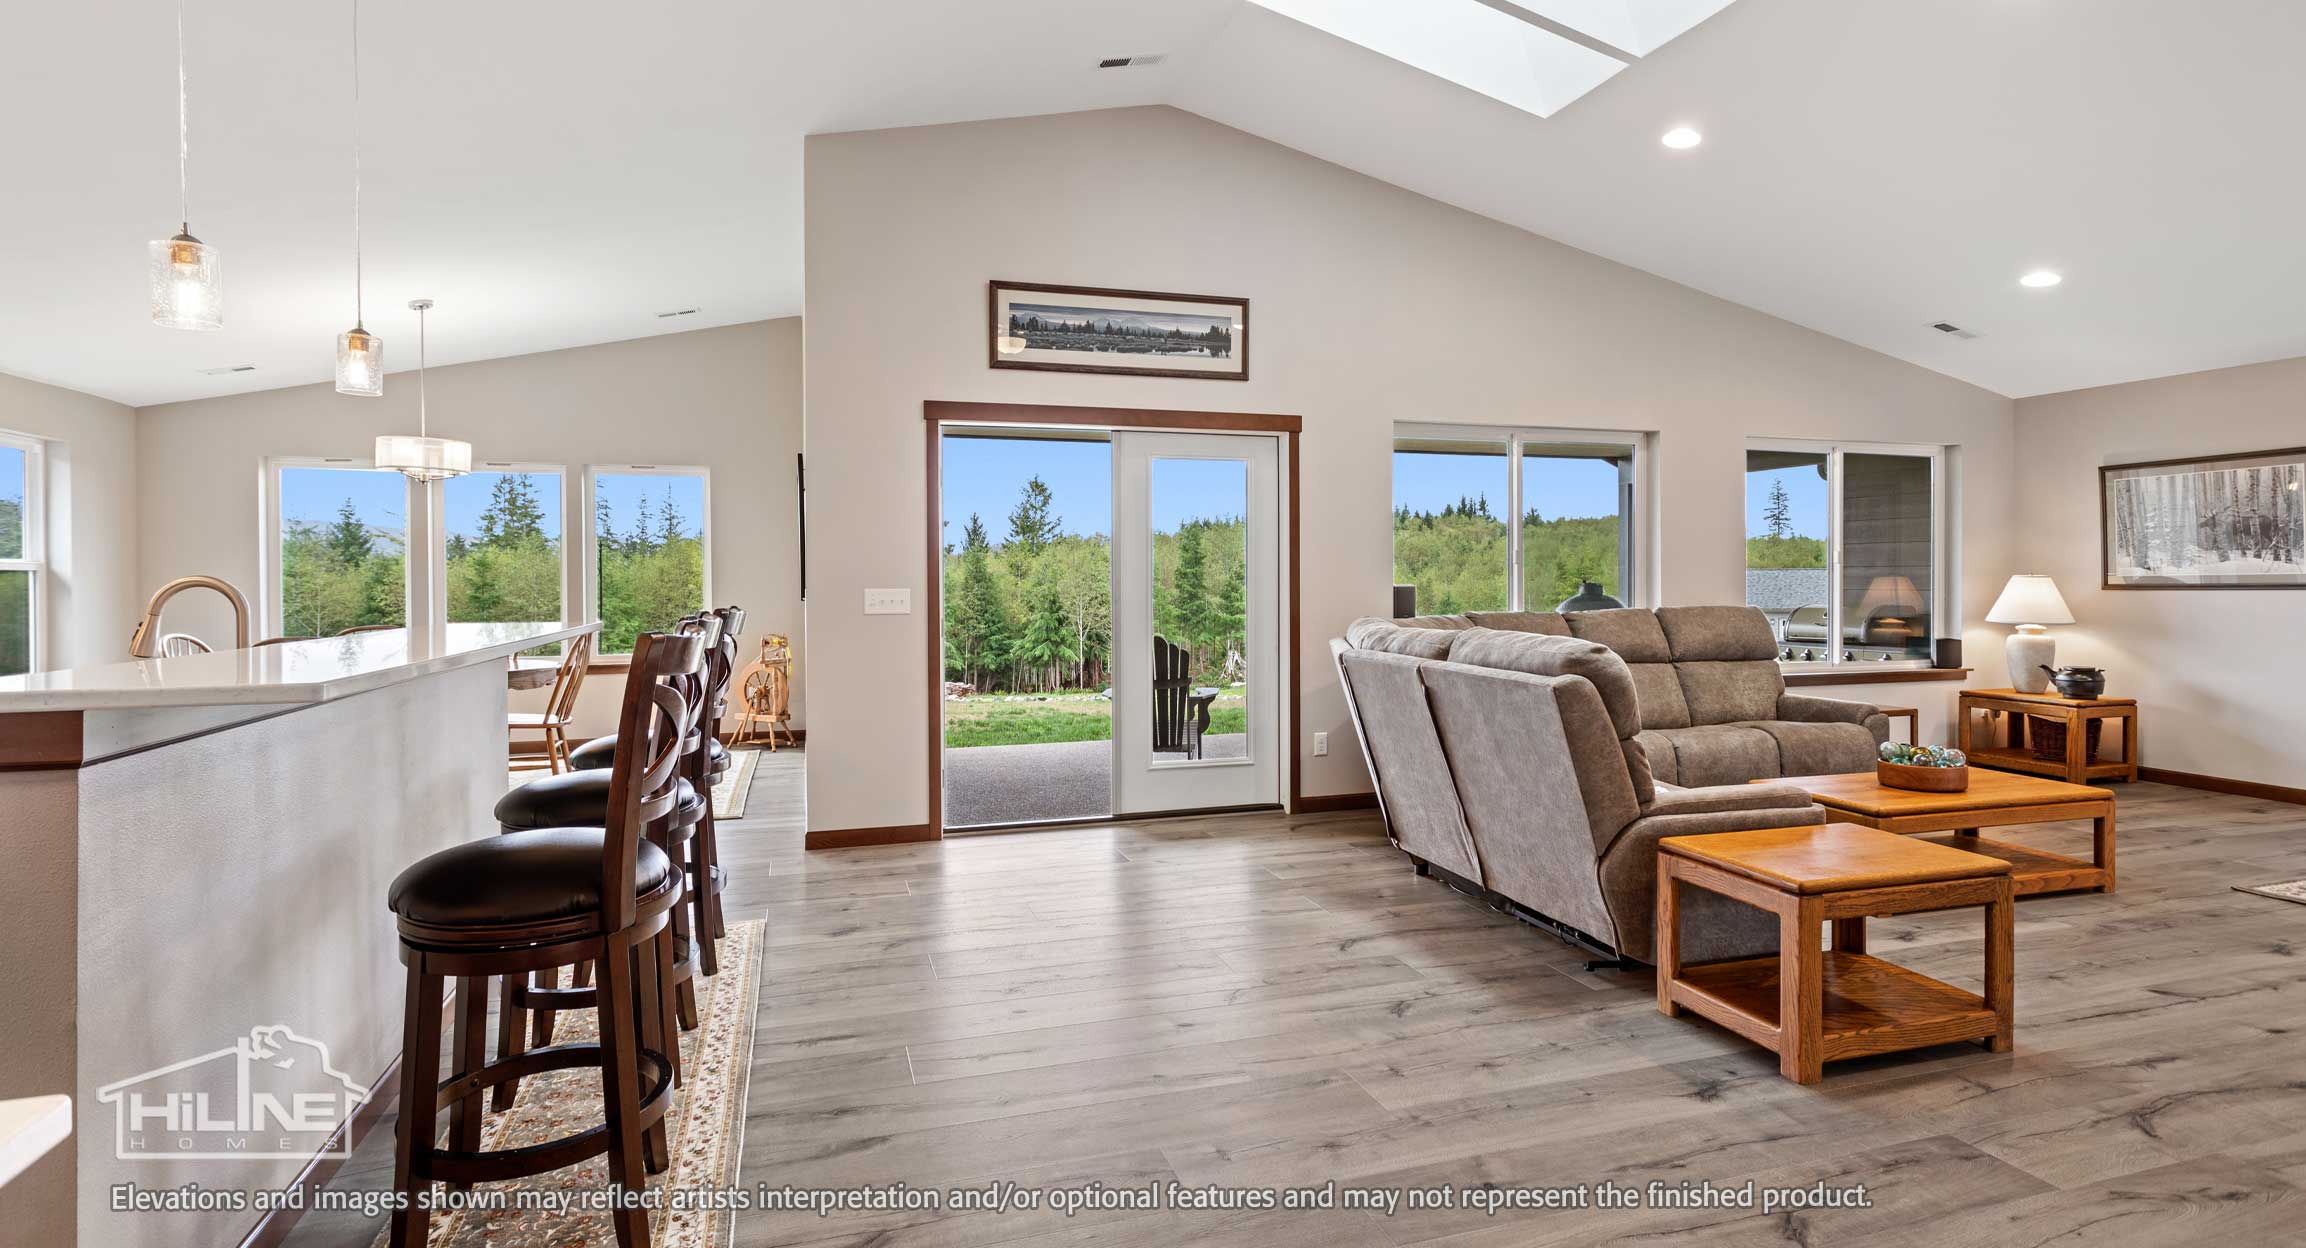 Image of HiLine Homes Plan 2443 Kitchen and Great Room Area with French Doors to Outdoor Living Space.